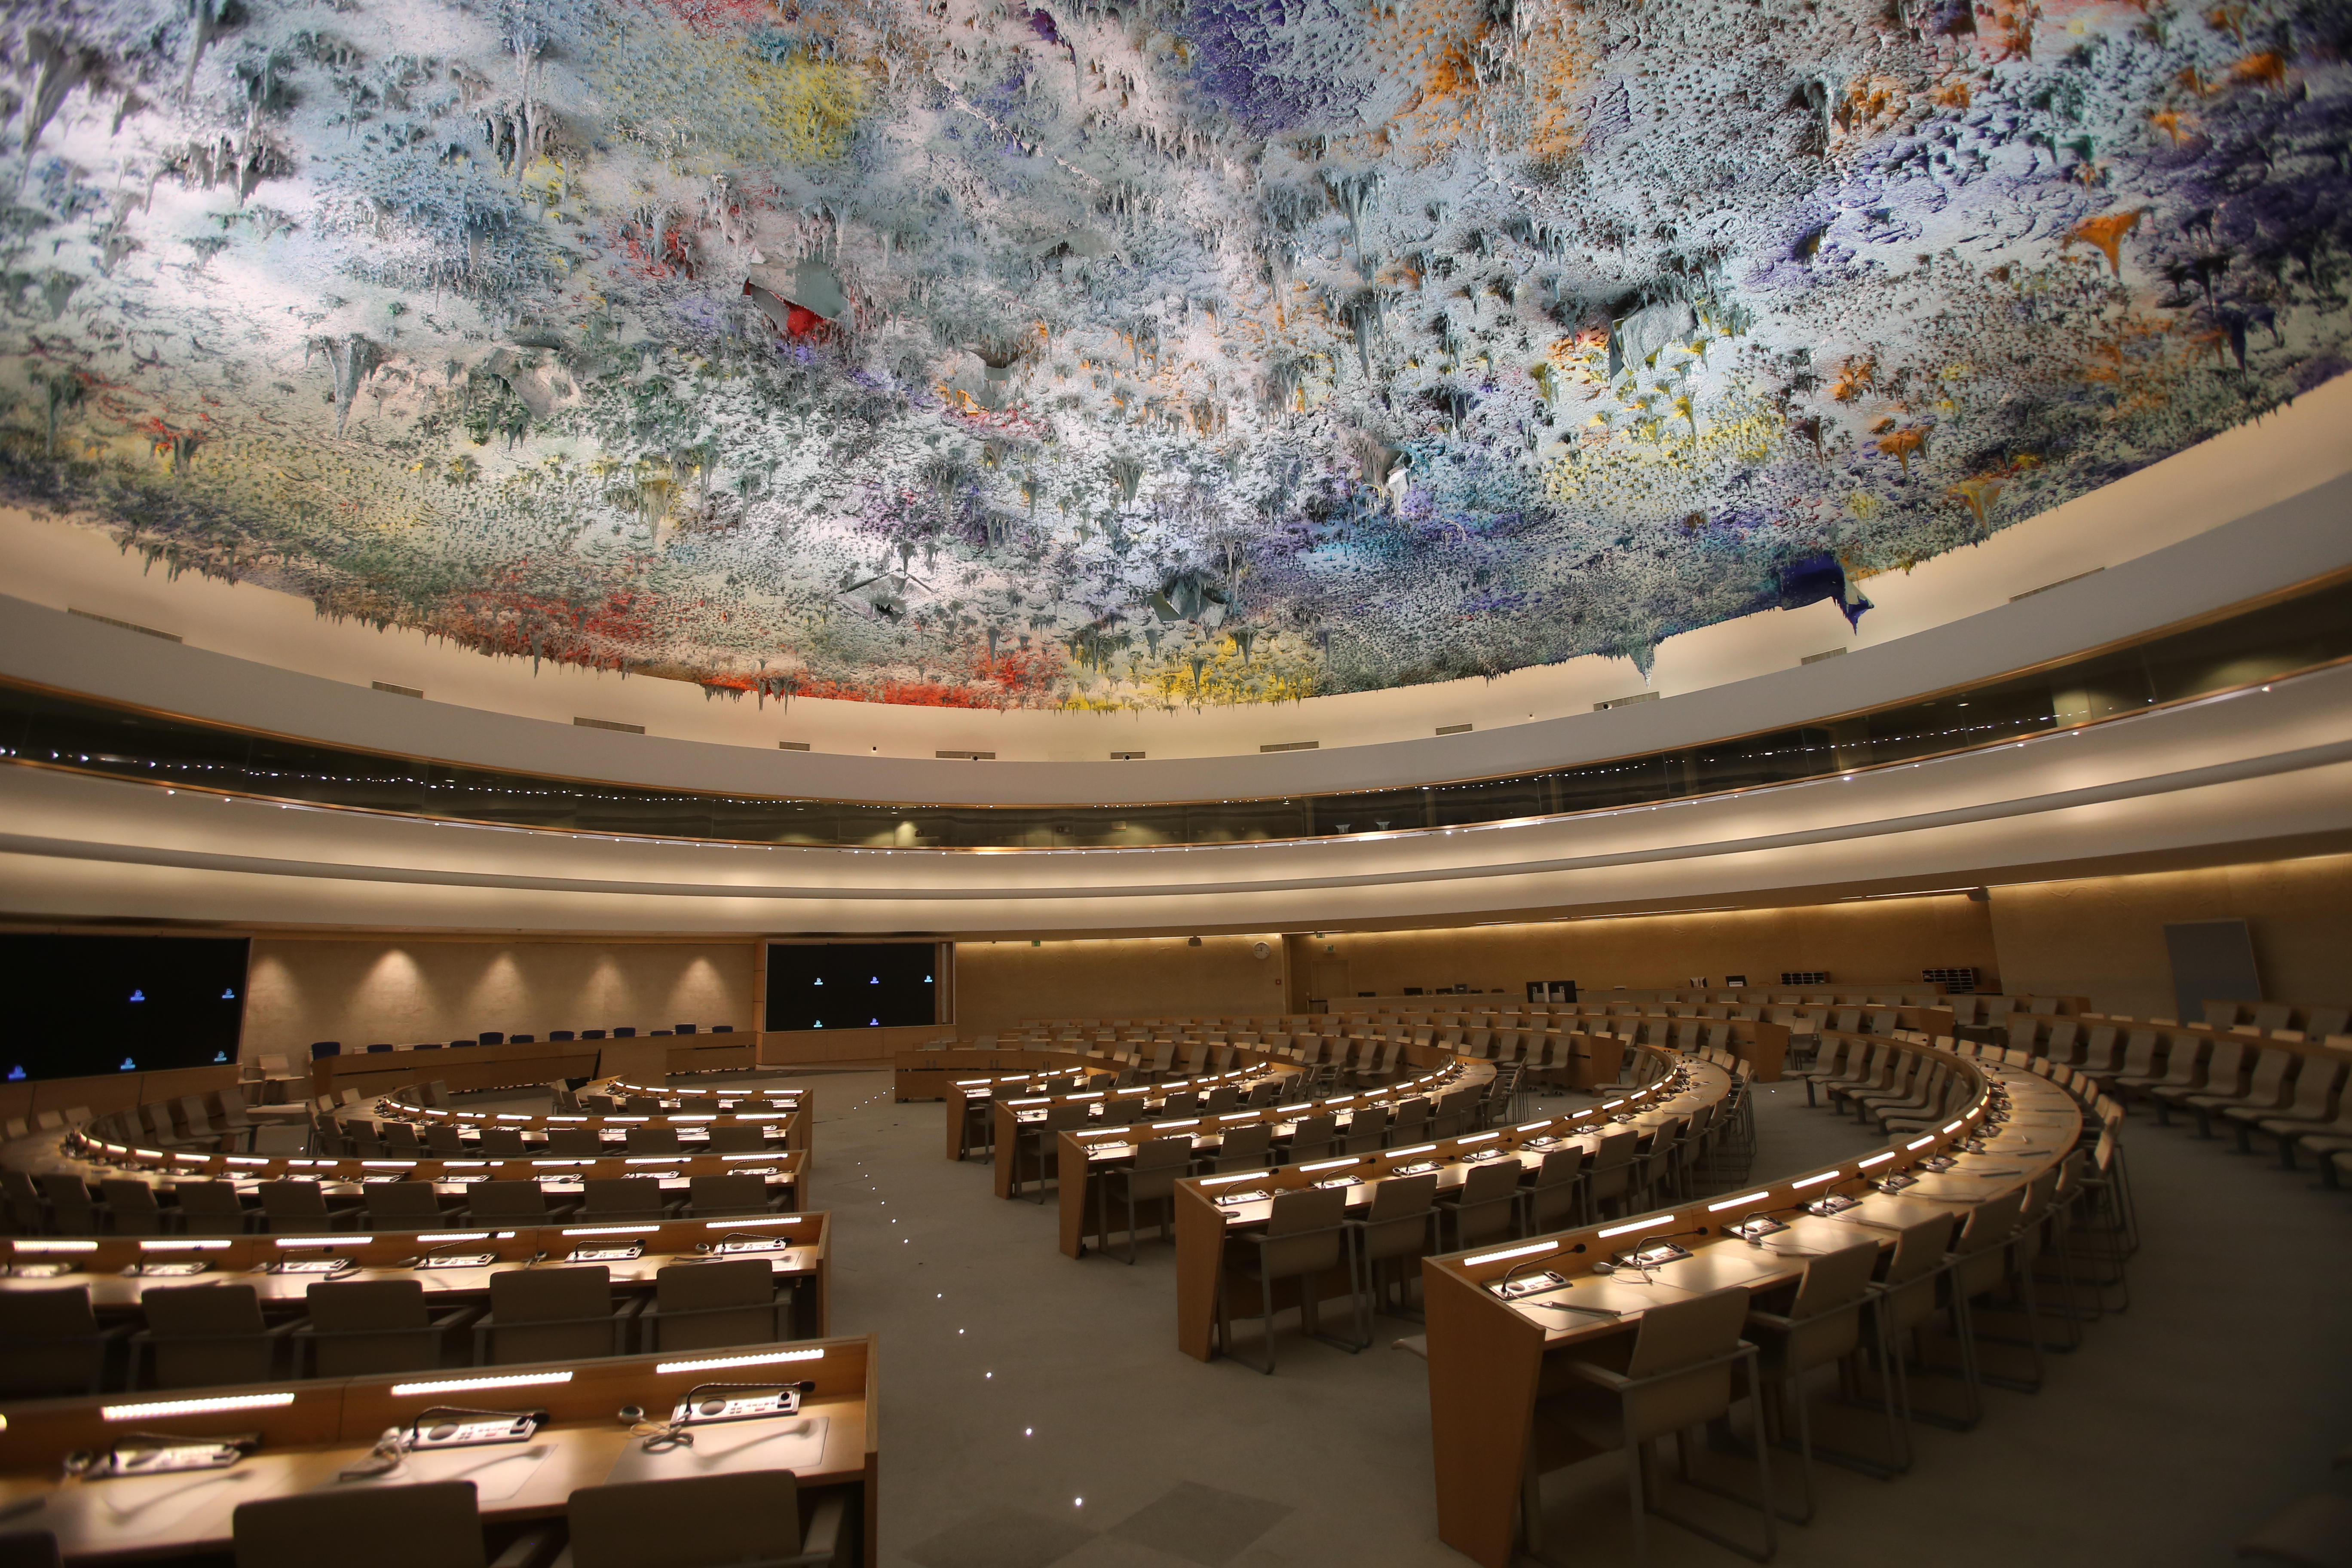 Photo: Human Rights and Alliance of Civilizations Room of the Palace of Nations, Geneva (Switzerland). It is the meeting room of the United Nations Human Rights Council. Author: Ludovic Courtès. Source: Wikicommons: https://commons.wikimedia.org/wiki/File:UN_Geneva_Human_Rights_and_Alliance_of_Civilizations_Room.jpg